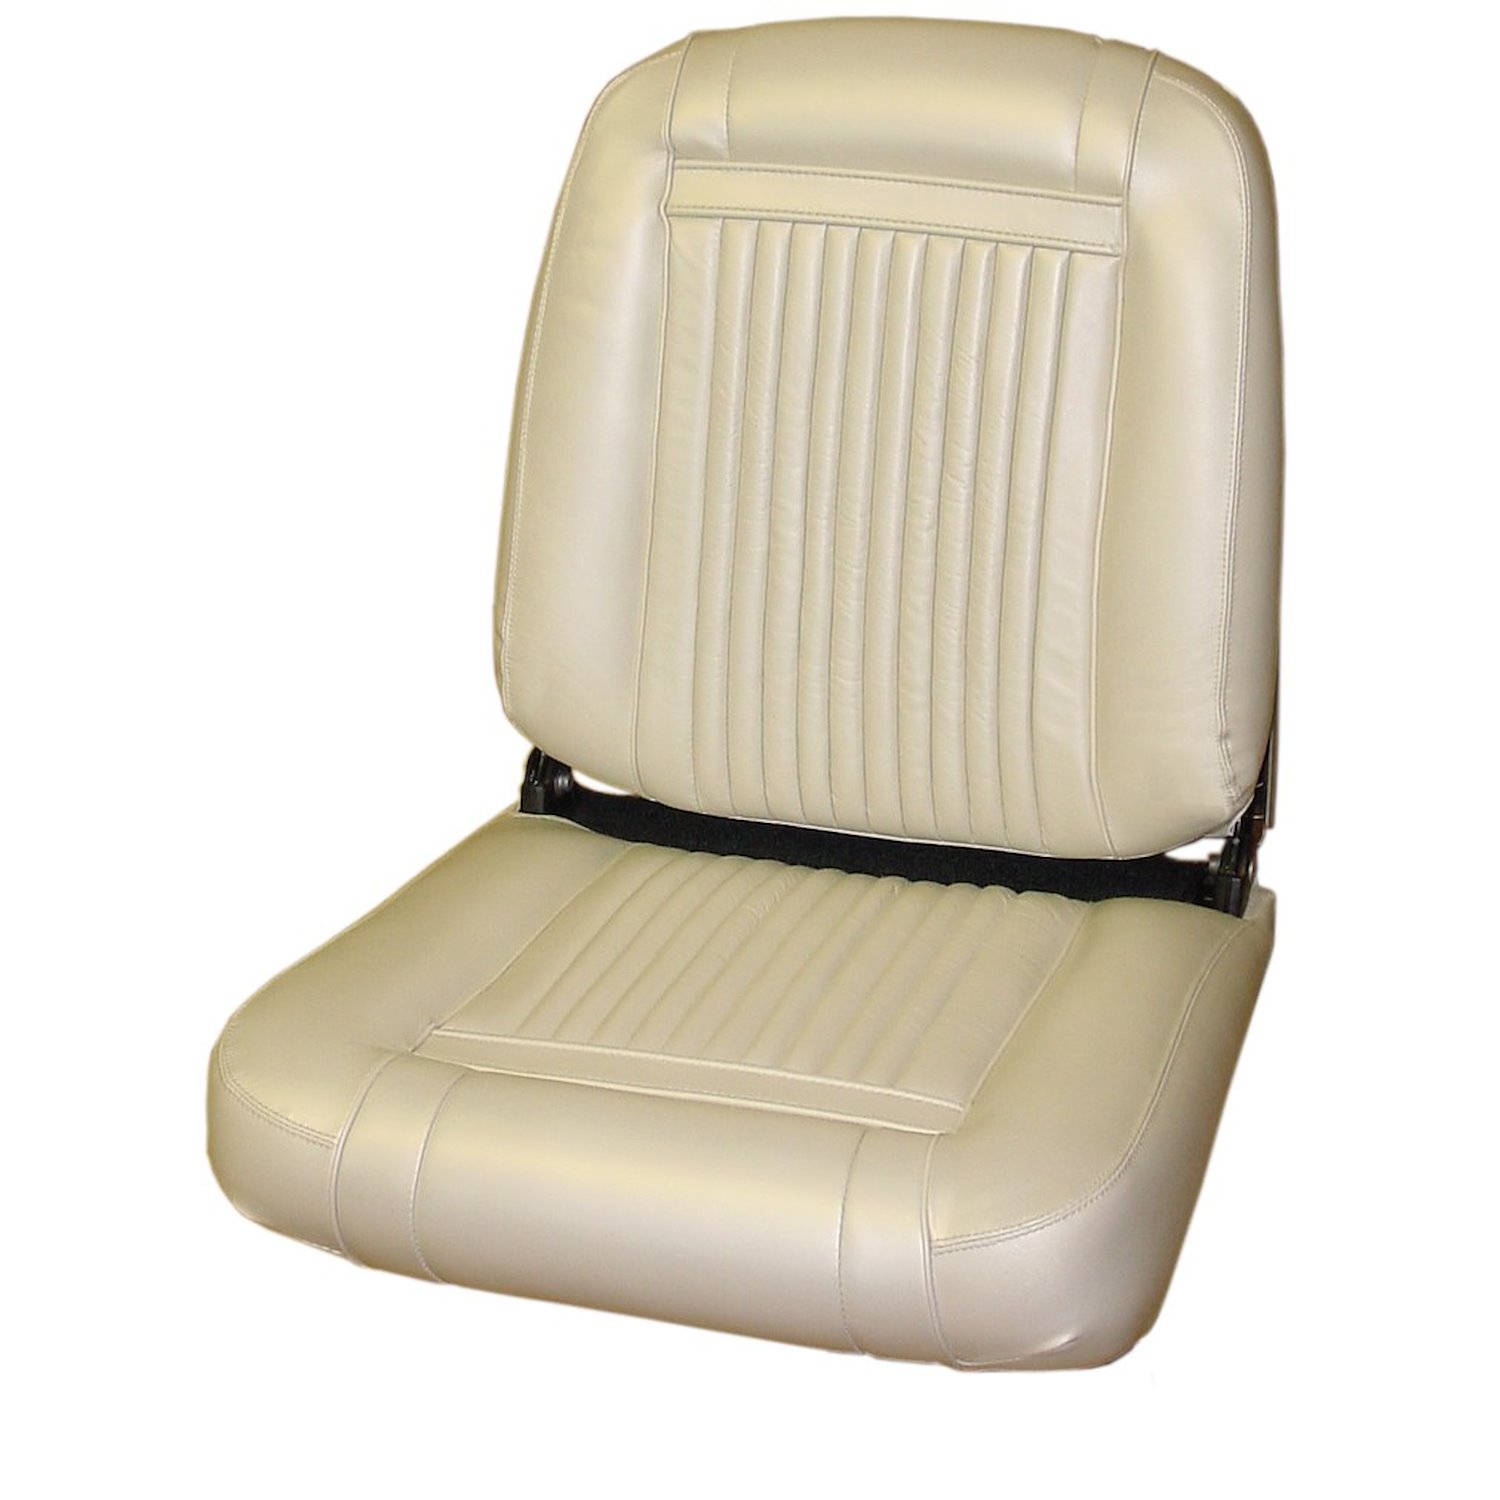 AA64CML001020201 64 CHRYSLER 300K LEATHER BUCKETS - PEARL WHITE